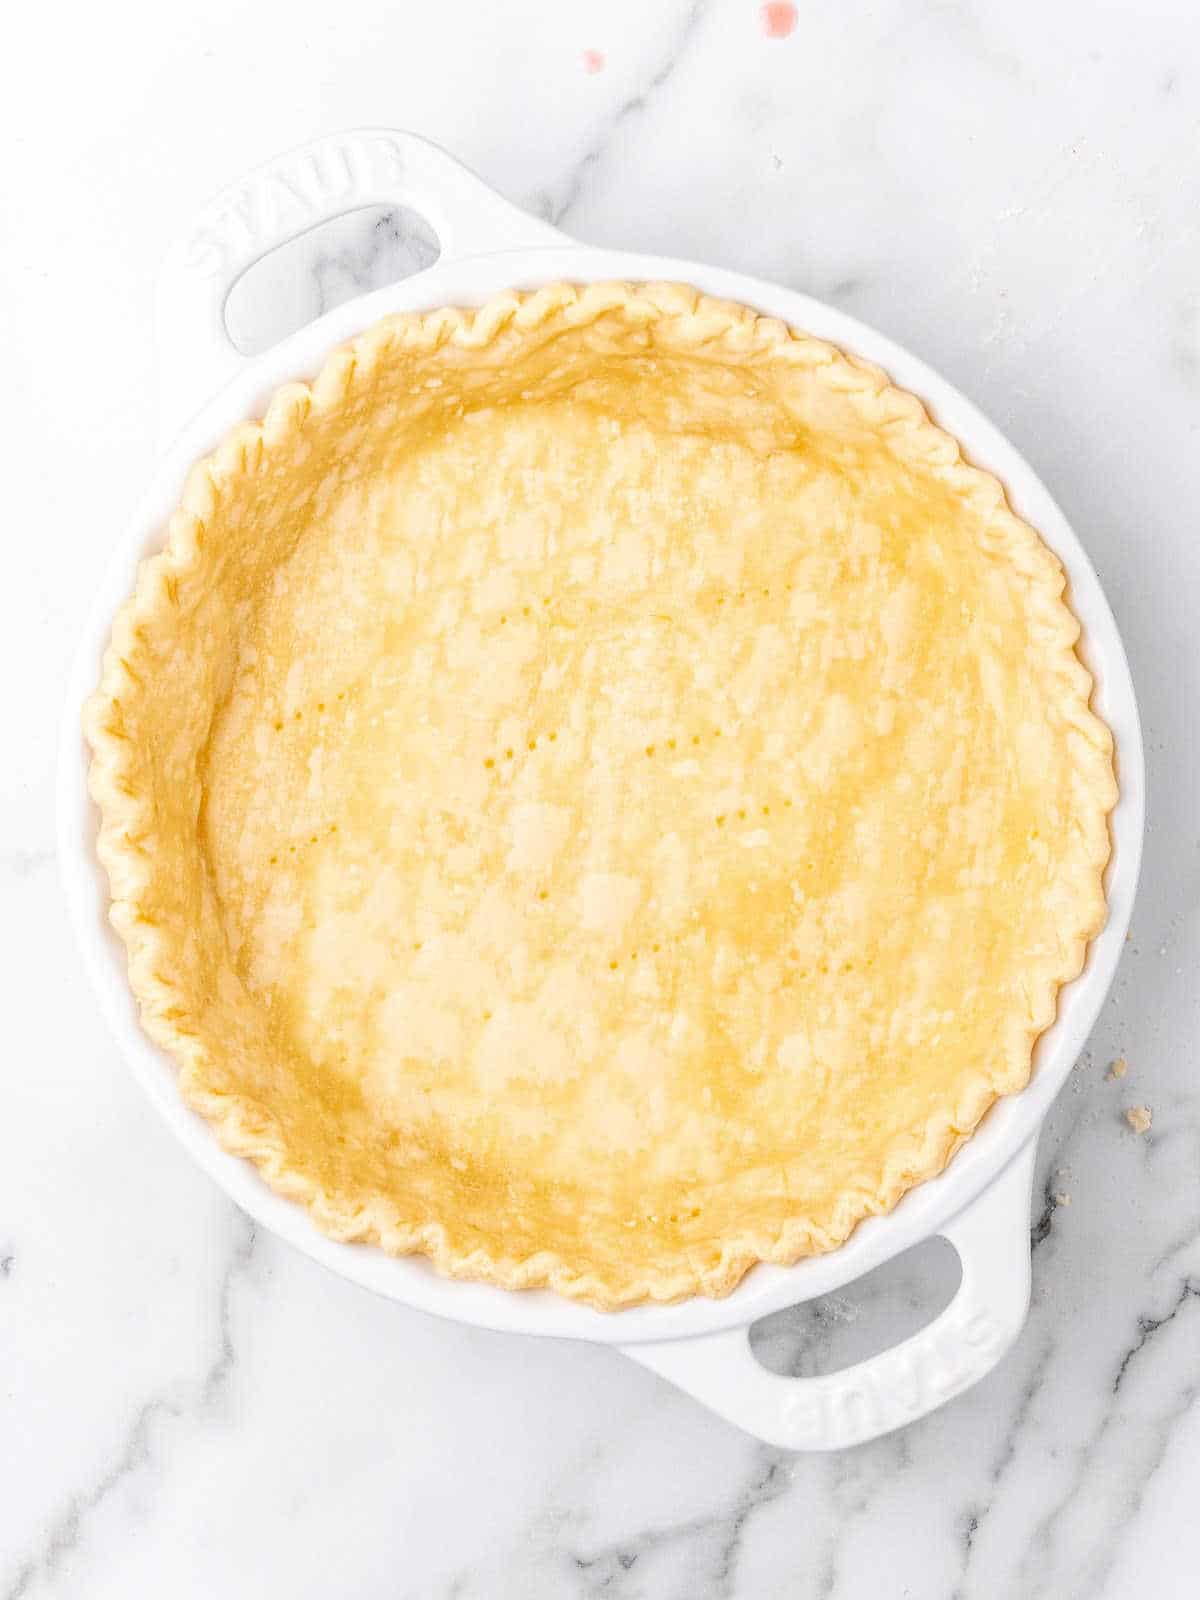 Half baked pie crust in a white pie plate on a white marbled surface.